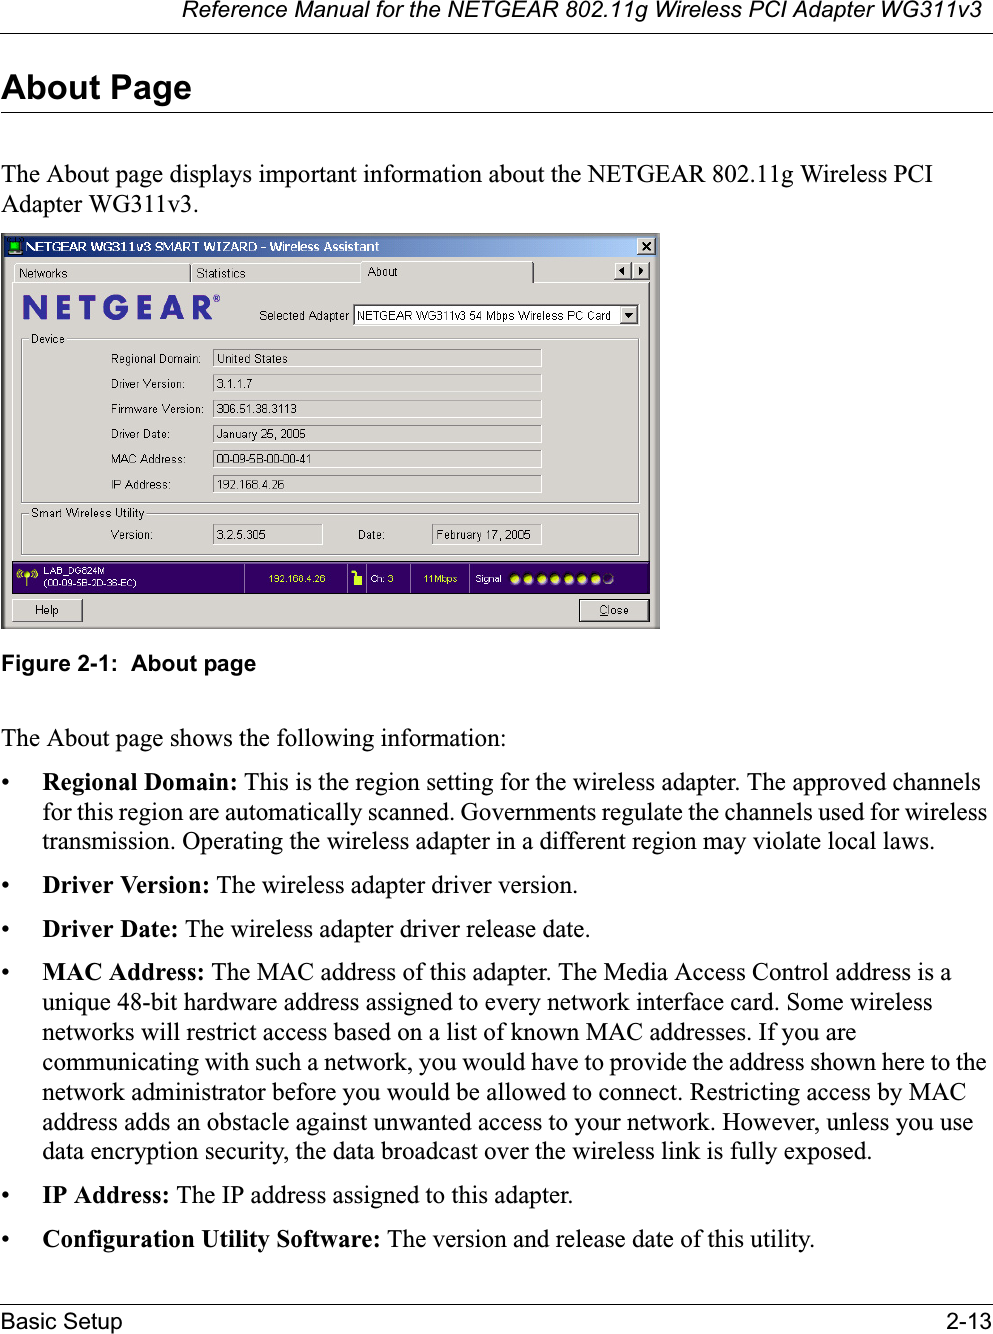 Reference Manual for the NETGEAR 802.11g Wireless PCI Adapter WG311v3Basic Setup 2-13About PageThe About page displays important information about the NETGEAR 802.11g Wireless PCI Adapter WG311v3.Figure 2-1:  About pageThe About page shows the following information:•Regional Domain: This is the region setting for the wireless adapter. The approved channels for this region are automatically scanned. Governments regulate the channels used for wireless transmission. Operating the wireless adapter in a different region may violate local laws.•Driver Version: The wireless adapter driver version. •Driver Date: The wireless adapter driver release date.•MAC Address: The MAC address of this adapter. The Media Access Control address is a unique 48-bit hardware address assigned to every network interface card. Some wireless networks will restrict access based on a list of known MAC addresses. If you are communicating with such a network, you would have to provide the address shown here to the network administrator before you would be allowed to connect. Restricting access by MAC address adds an obstacle against unwanted access to your network. However, unless you use data encryption security, the data broadcast over the wireless link is fully exposed.•IP Address: The IP address assigned to this adapter.•Configuration Utility Software: The version and release date of this utility.